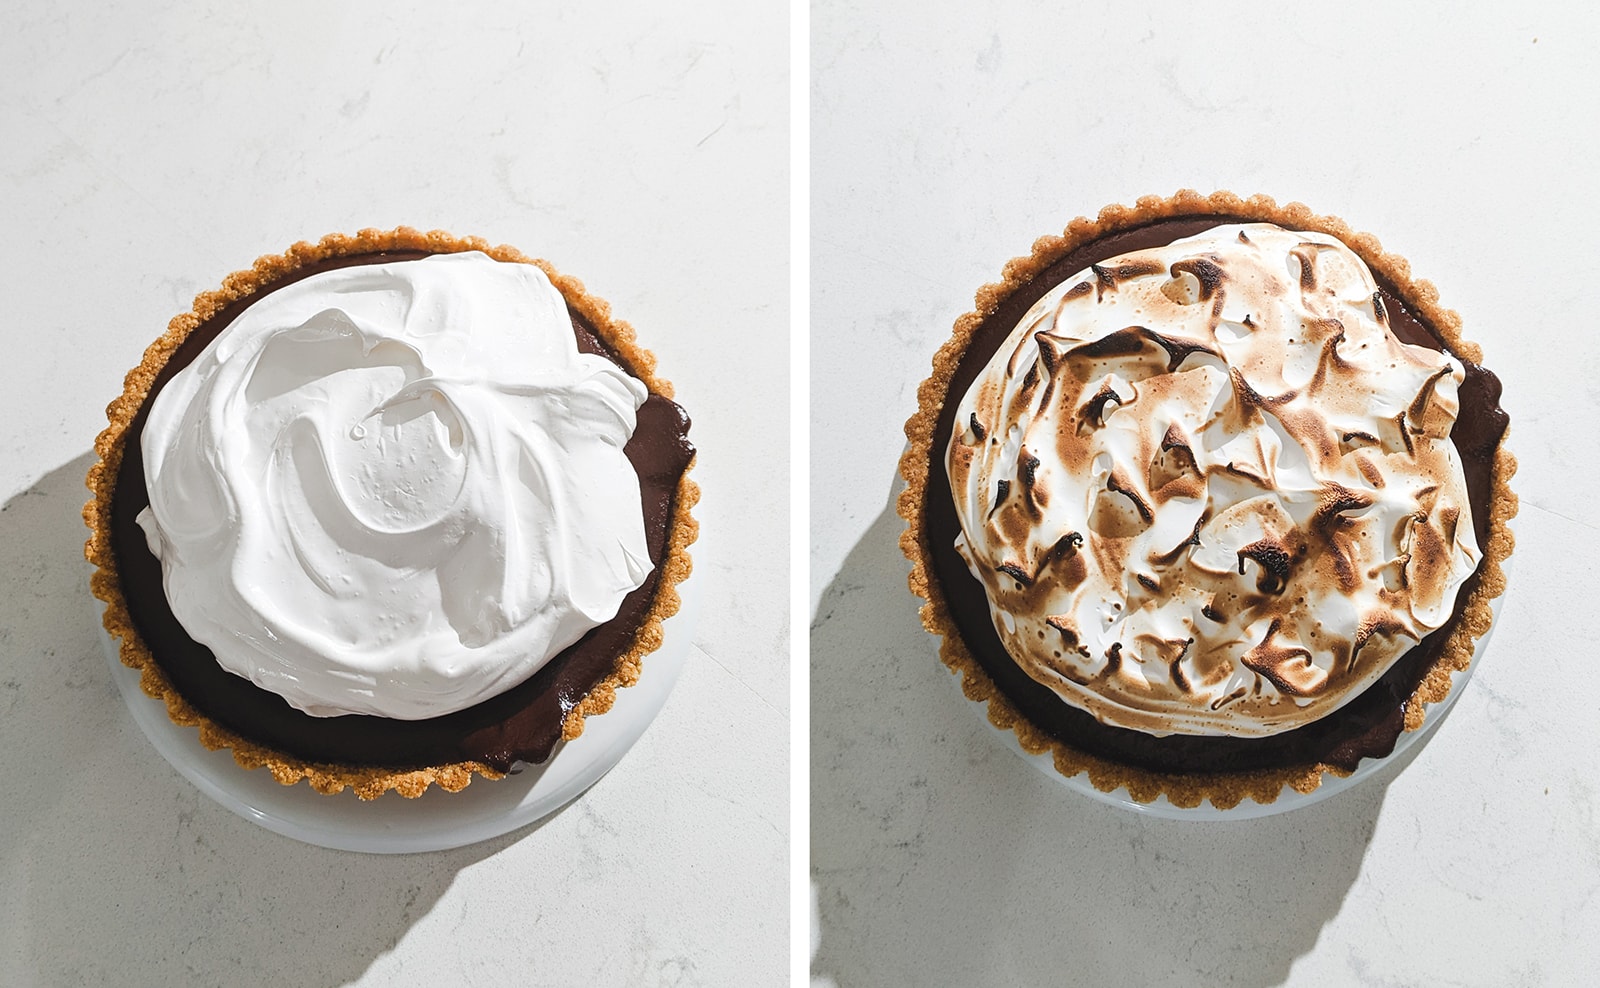 S’mores tart with untoasted and toasted meringue on top.